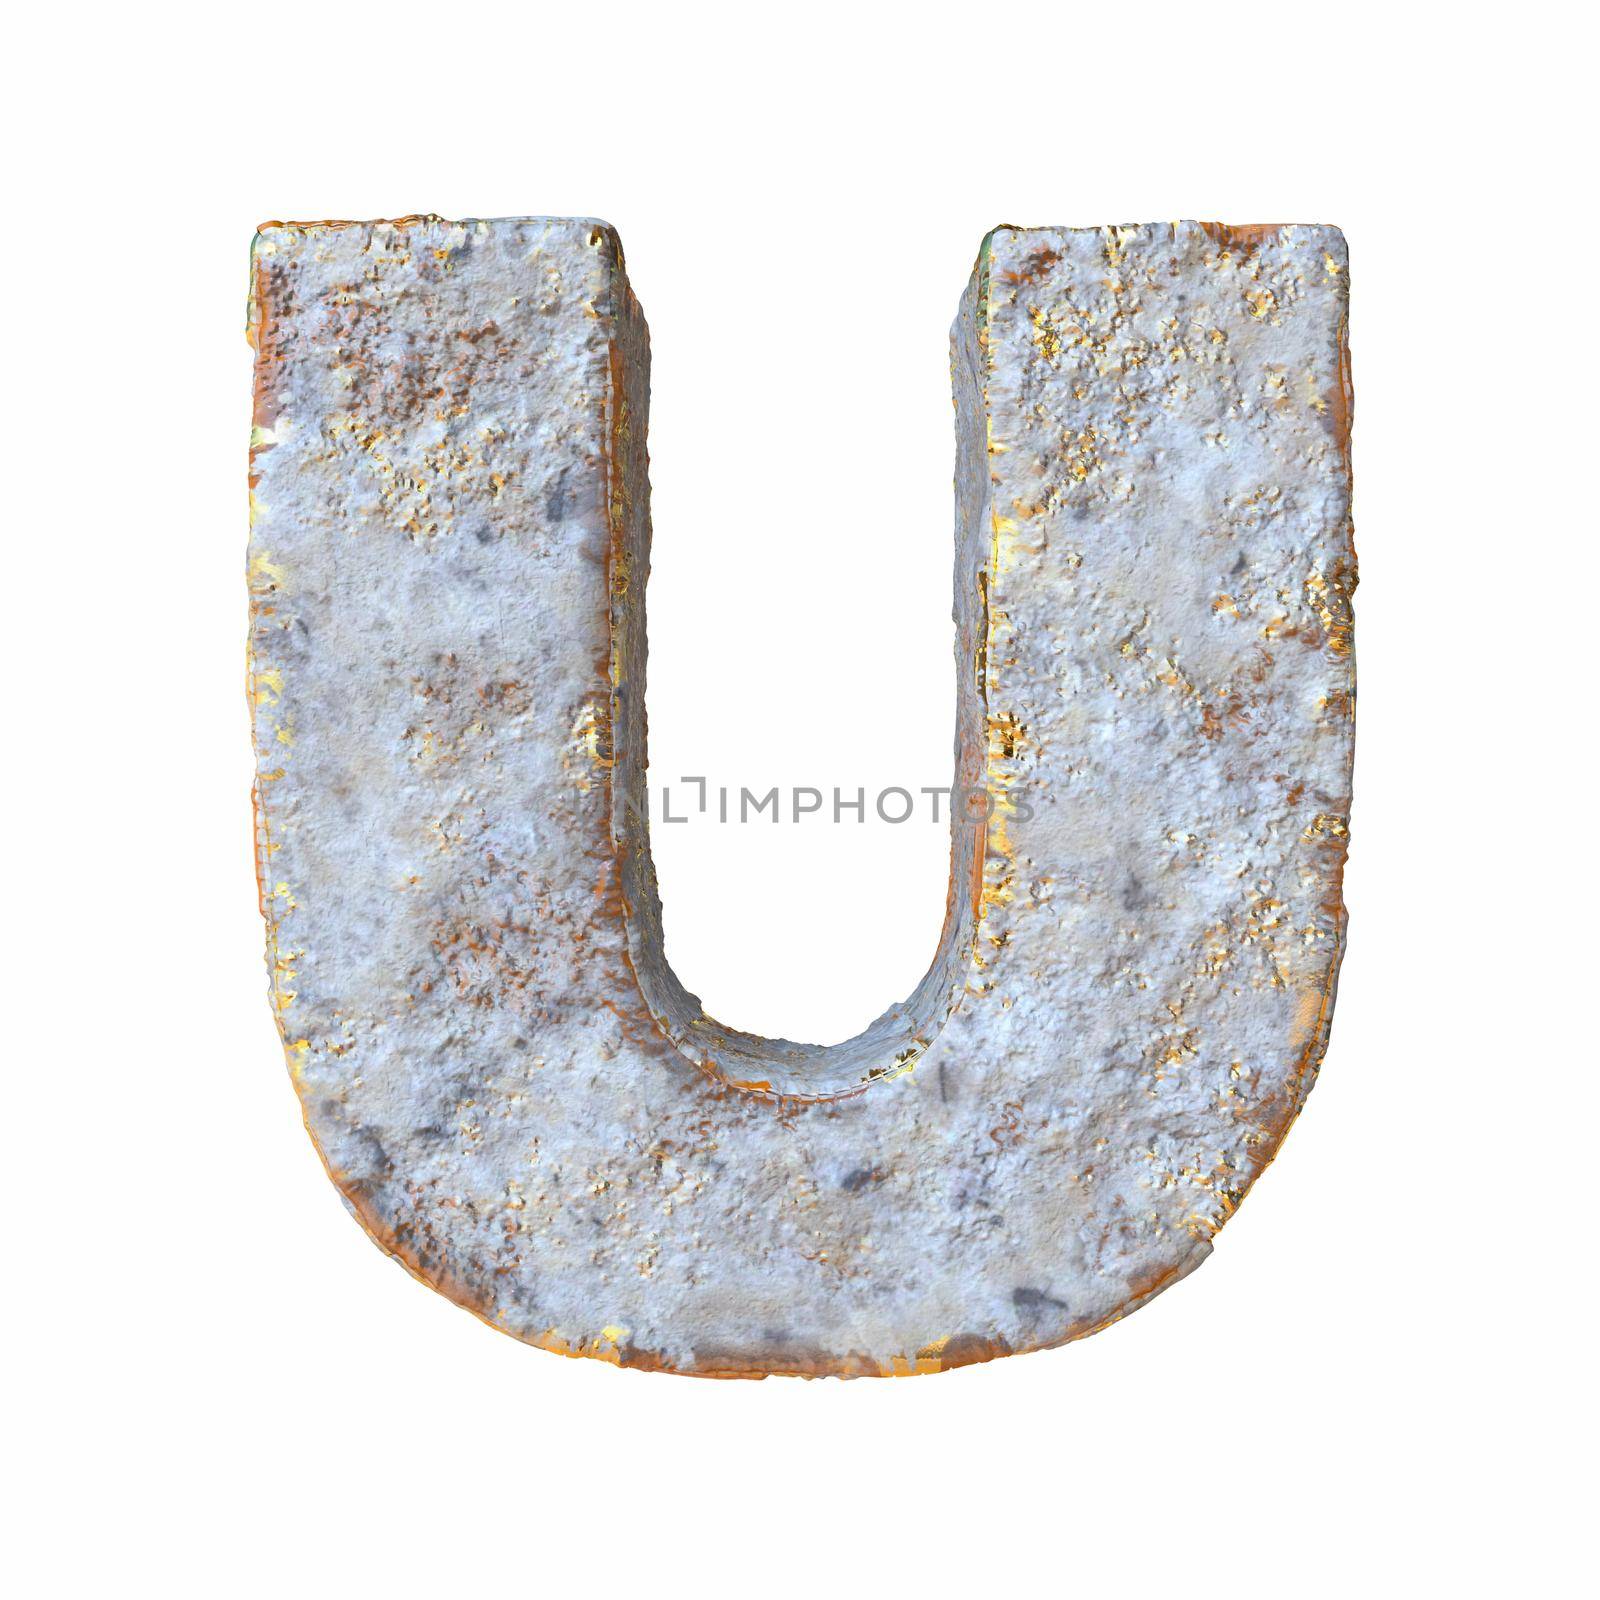 Stone with golden metal particles Letter U 3D rendering illustration isolated on white background